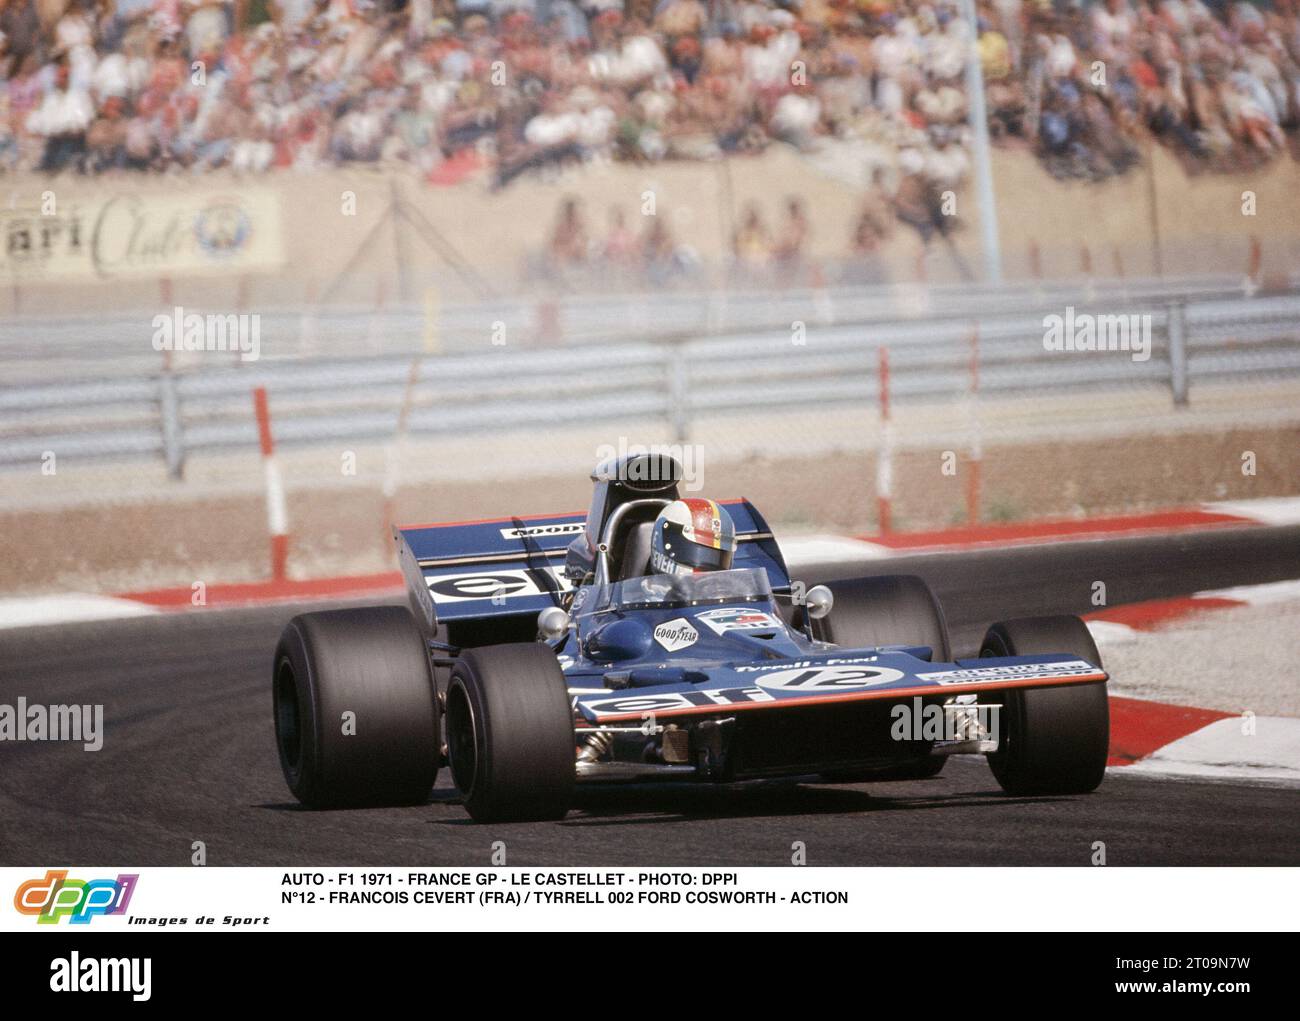 AUTO - F1 1971 - FRANCE GP - LE CASTELLET - PHOTO: DPPI N°12 - FRANCOIS CEVERT (FRA) / TYRRELL 002 FORD COSWORTH - ACTION Stock Photo